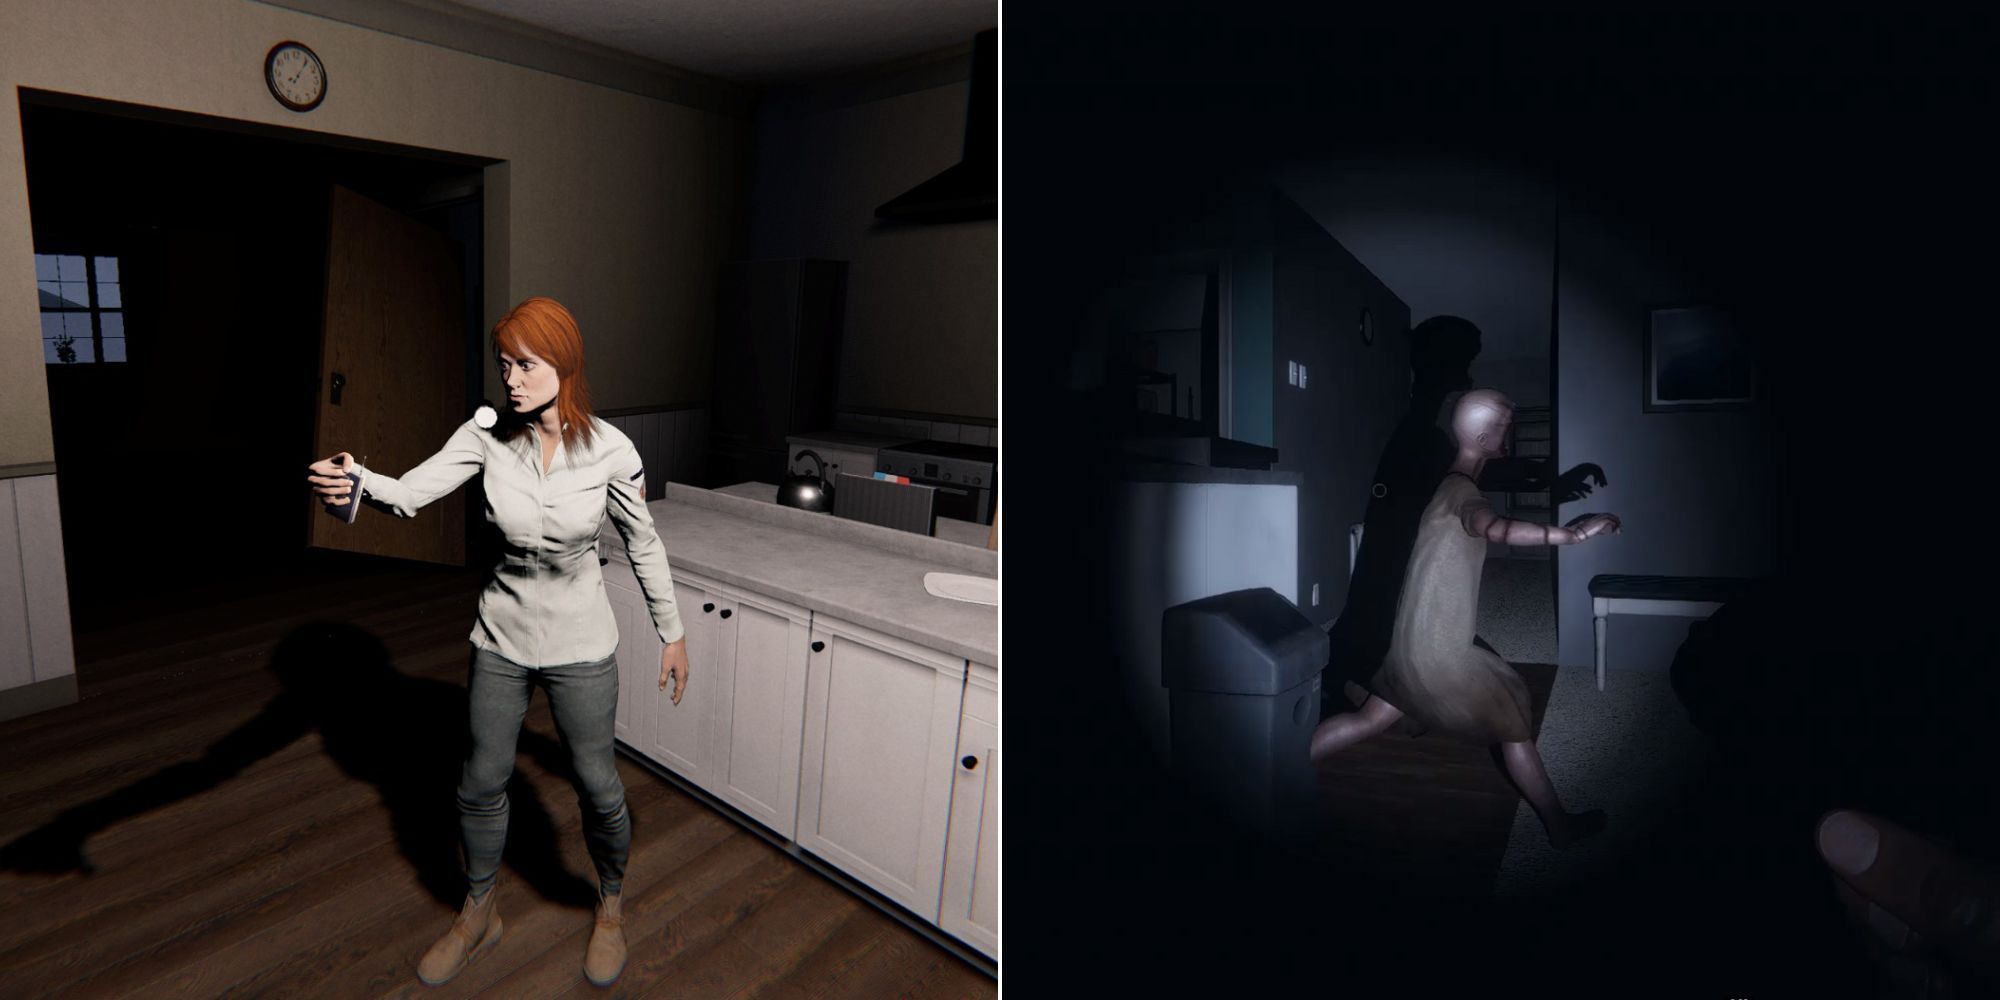 Phasmophobia split image of a player holding a spirit box and a hunting ghost